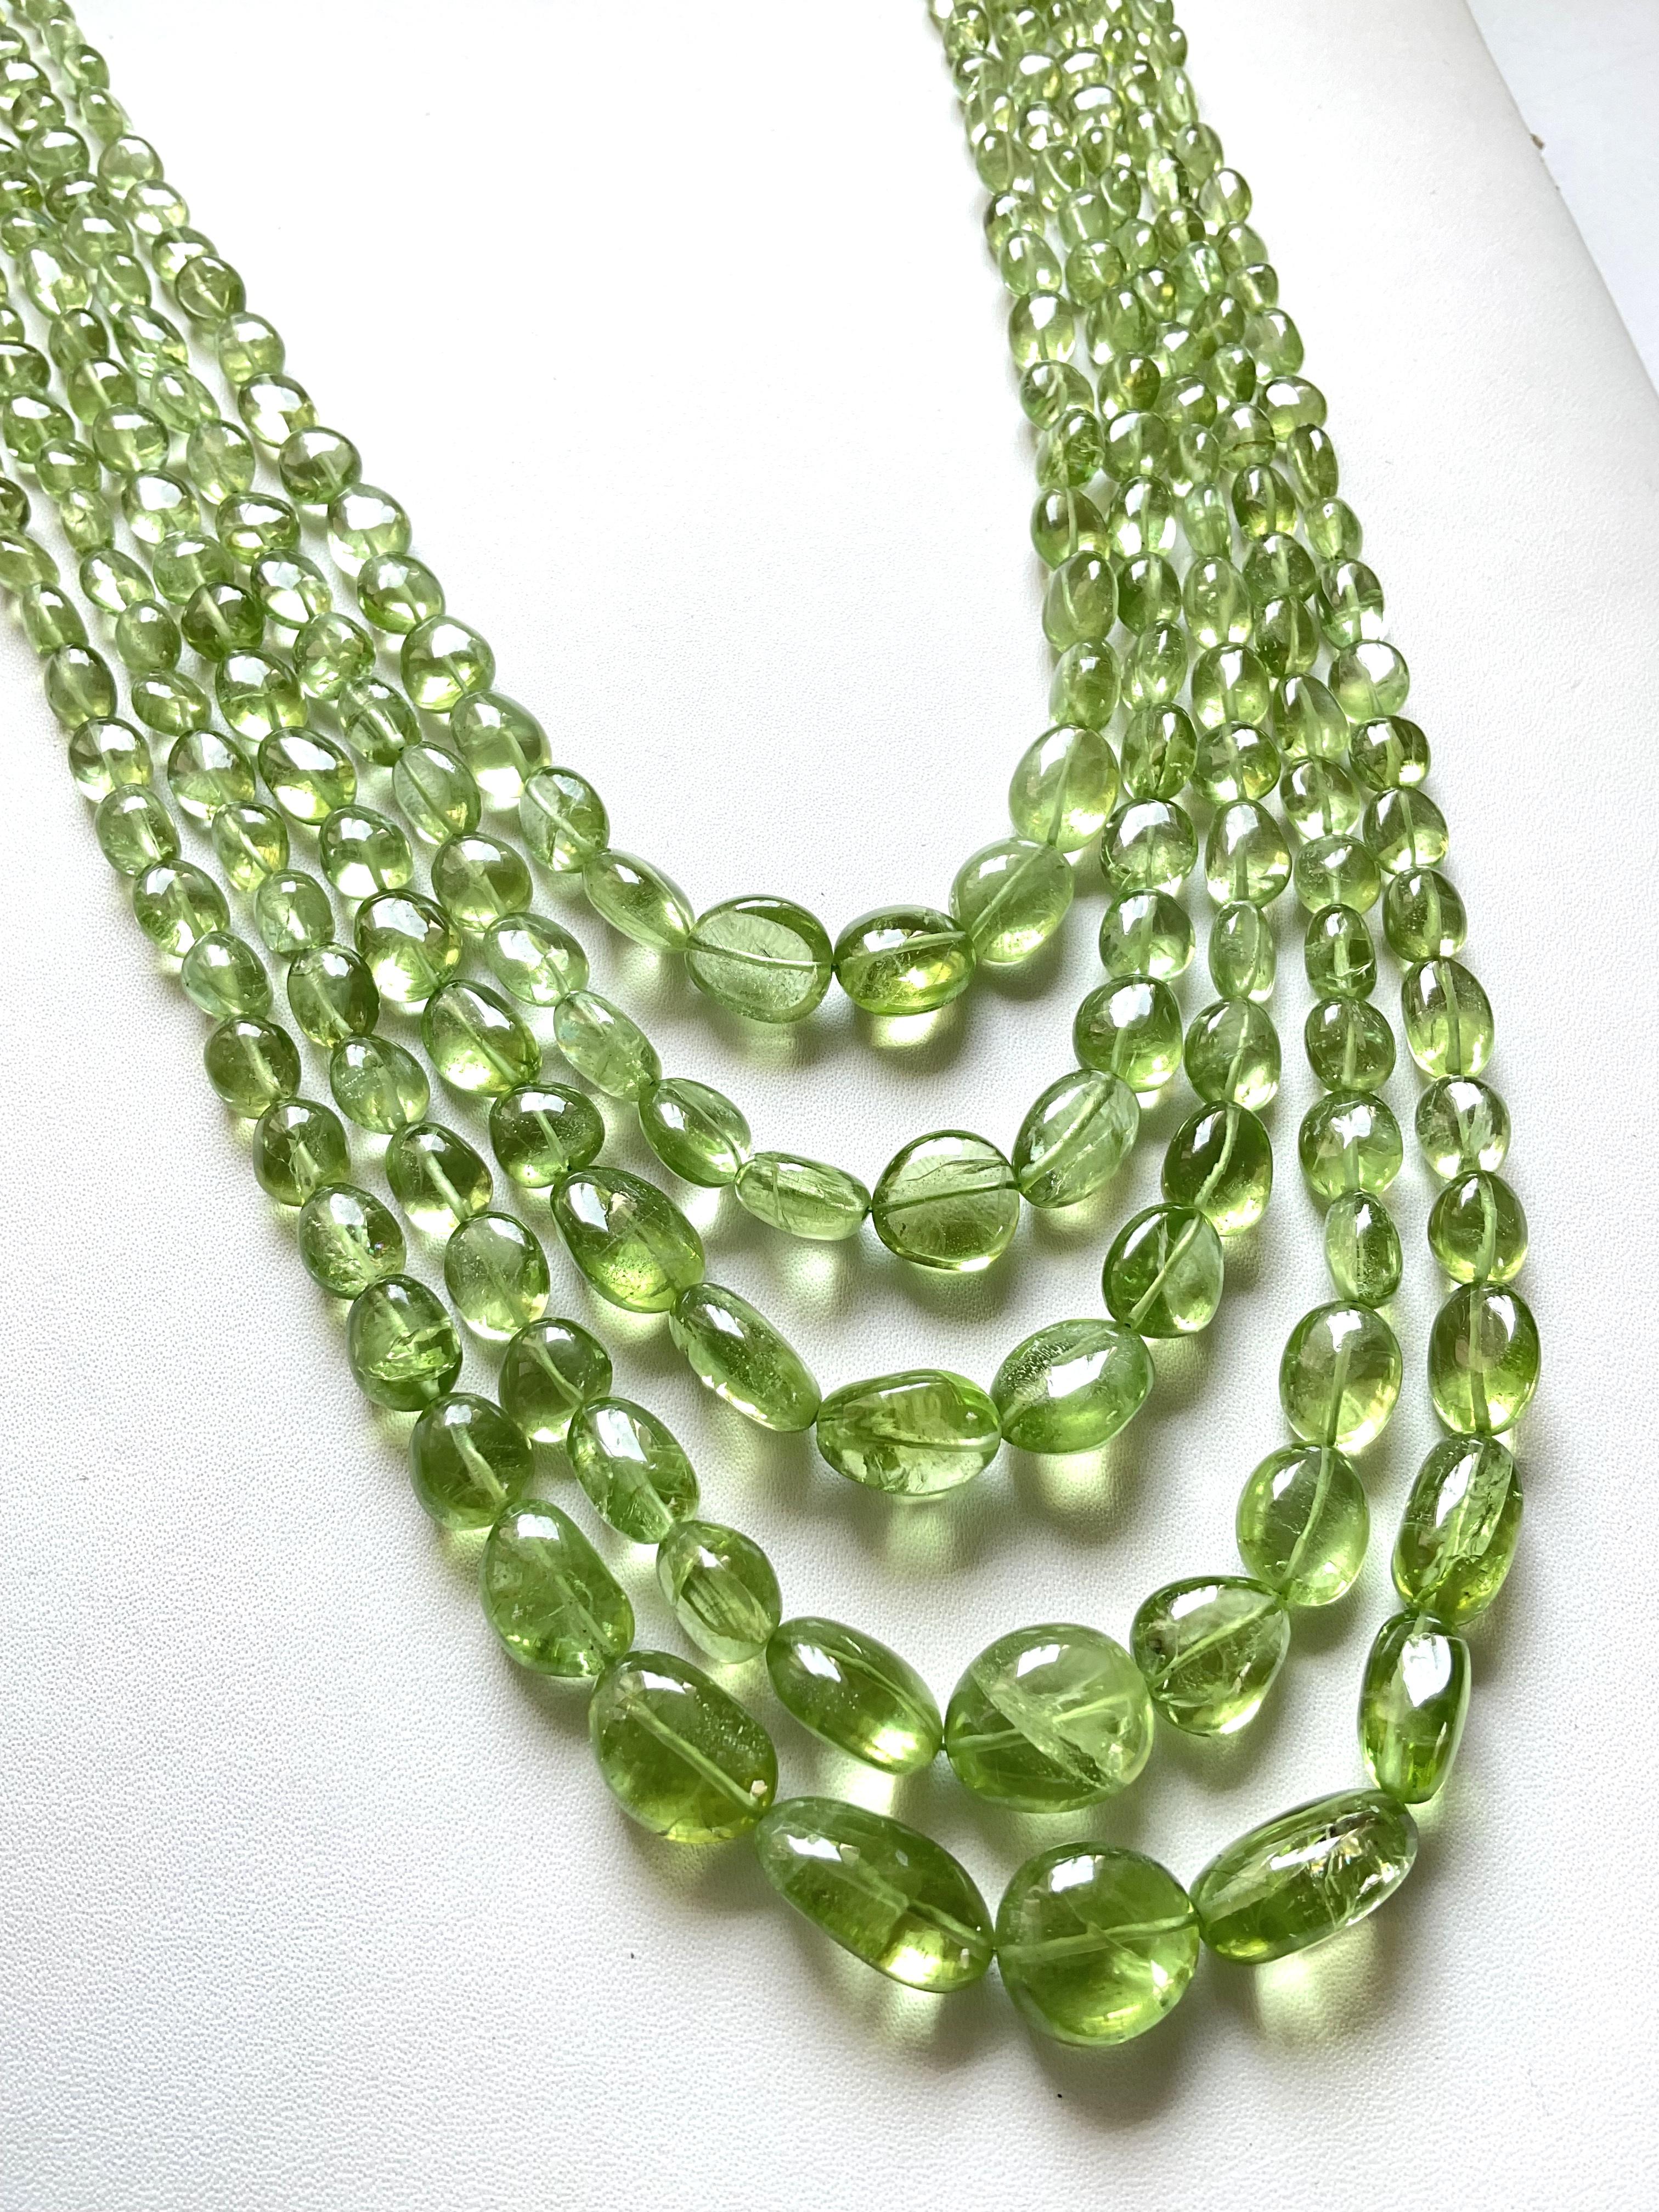 Women's or Men's 839.05 carats apple green peridot top quality plain tumbled natural necklace gem For Sale